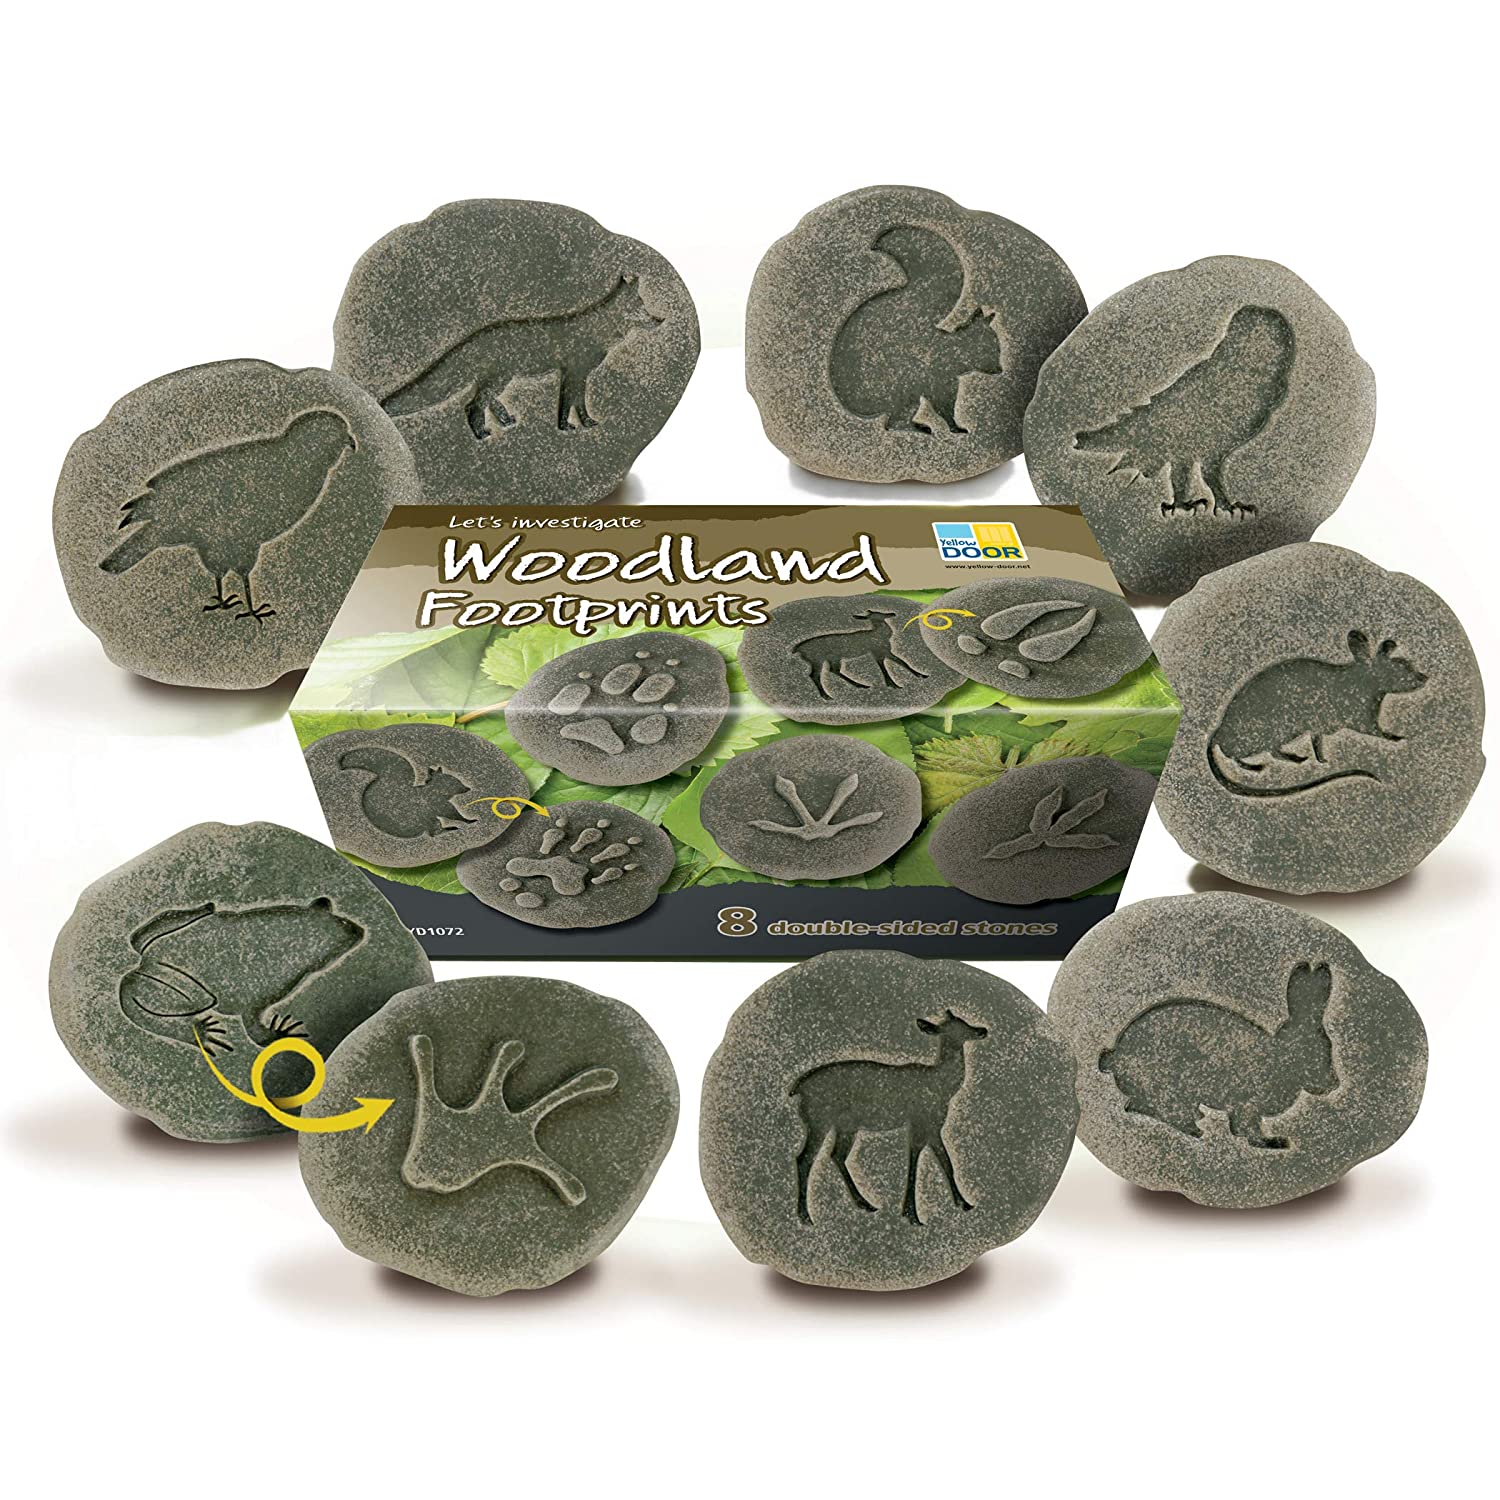 Yellow Door YUS1072 Let’s Investigate Woodland Footprint Stone (Pack of 8)